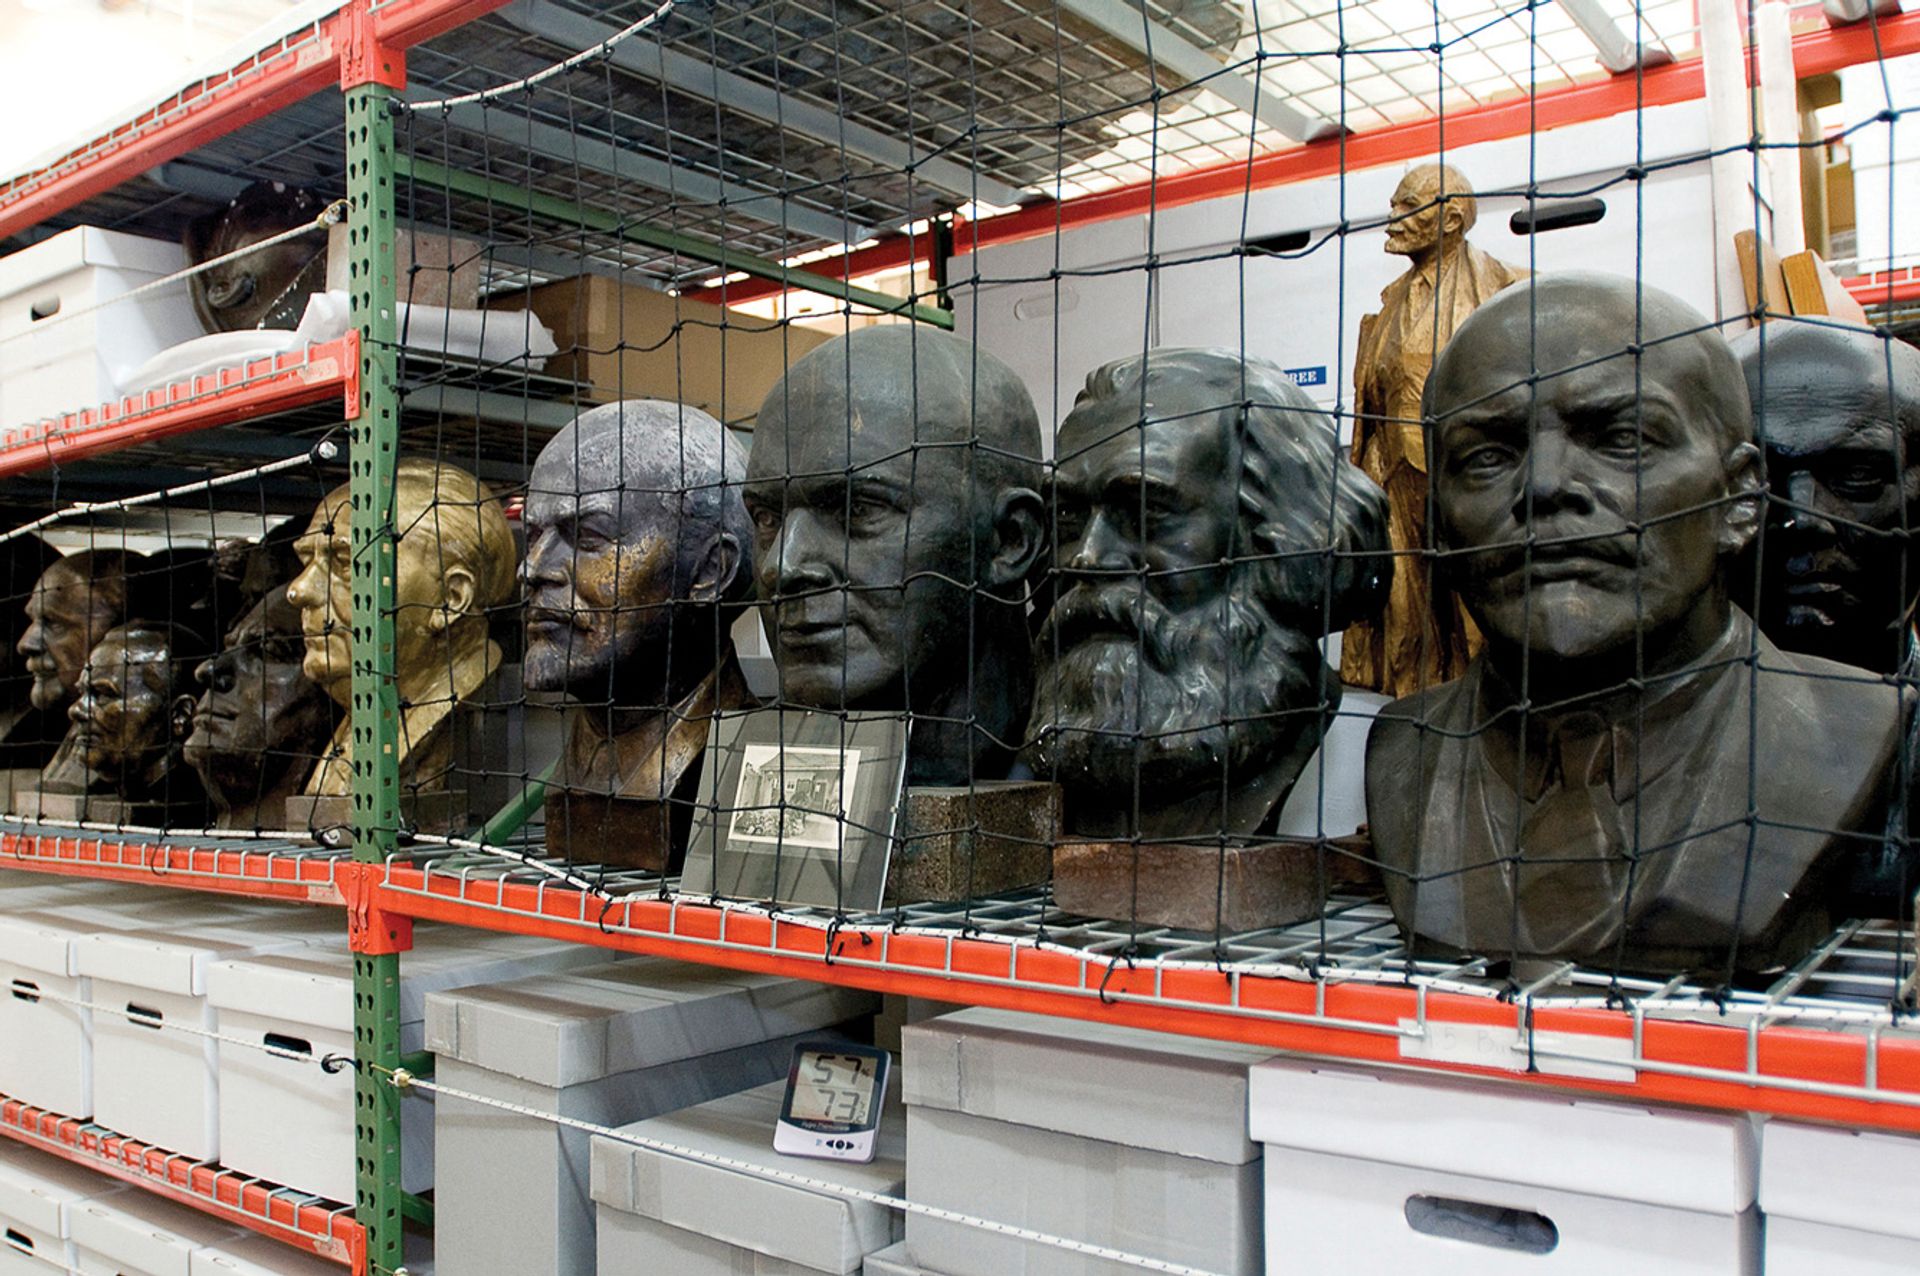 The Wende Museum is opening up its vault of Soviet busts courtesy of the Wende Museum